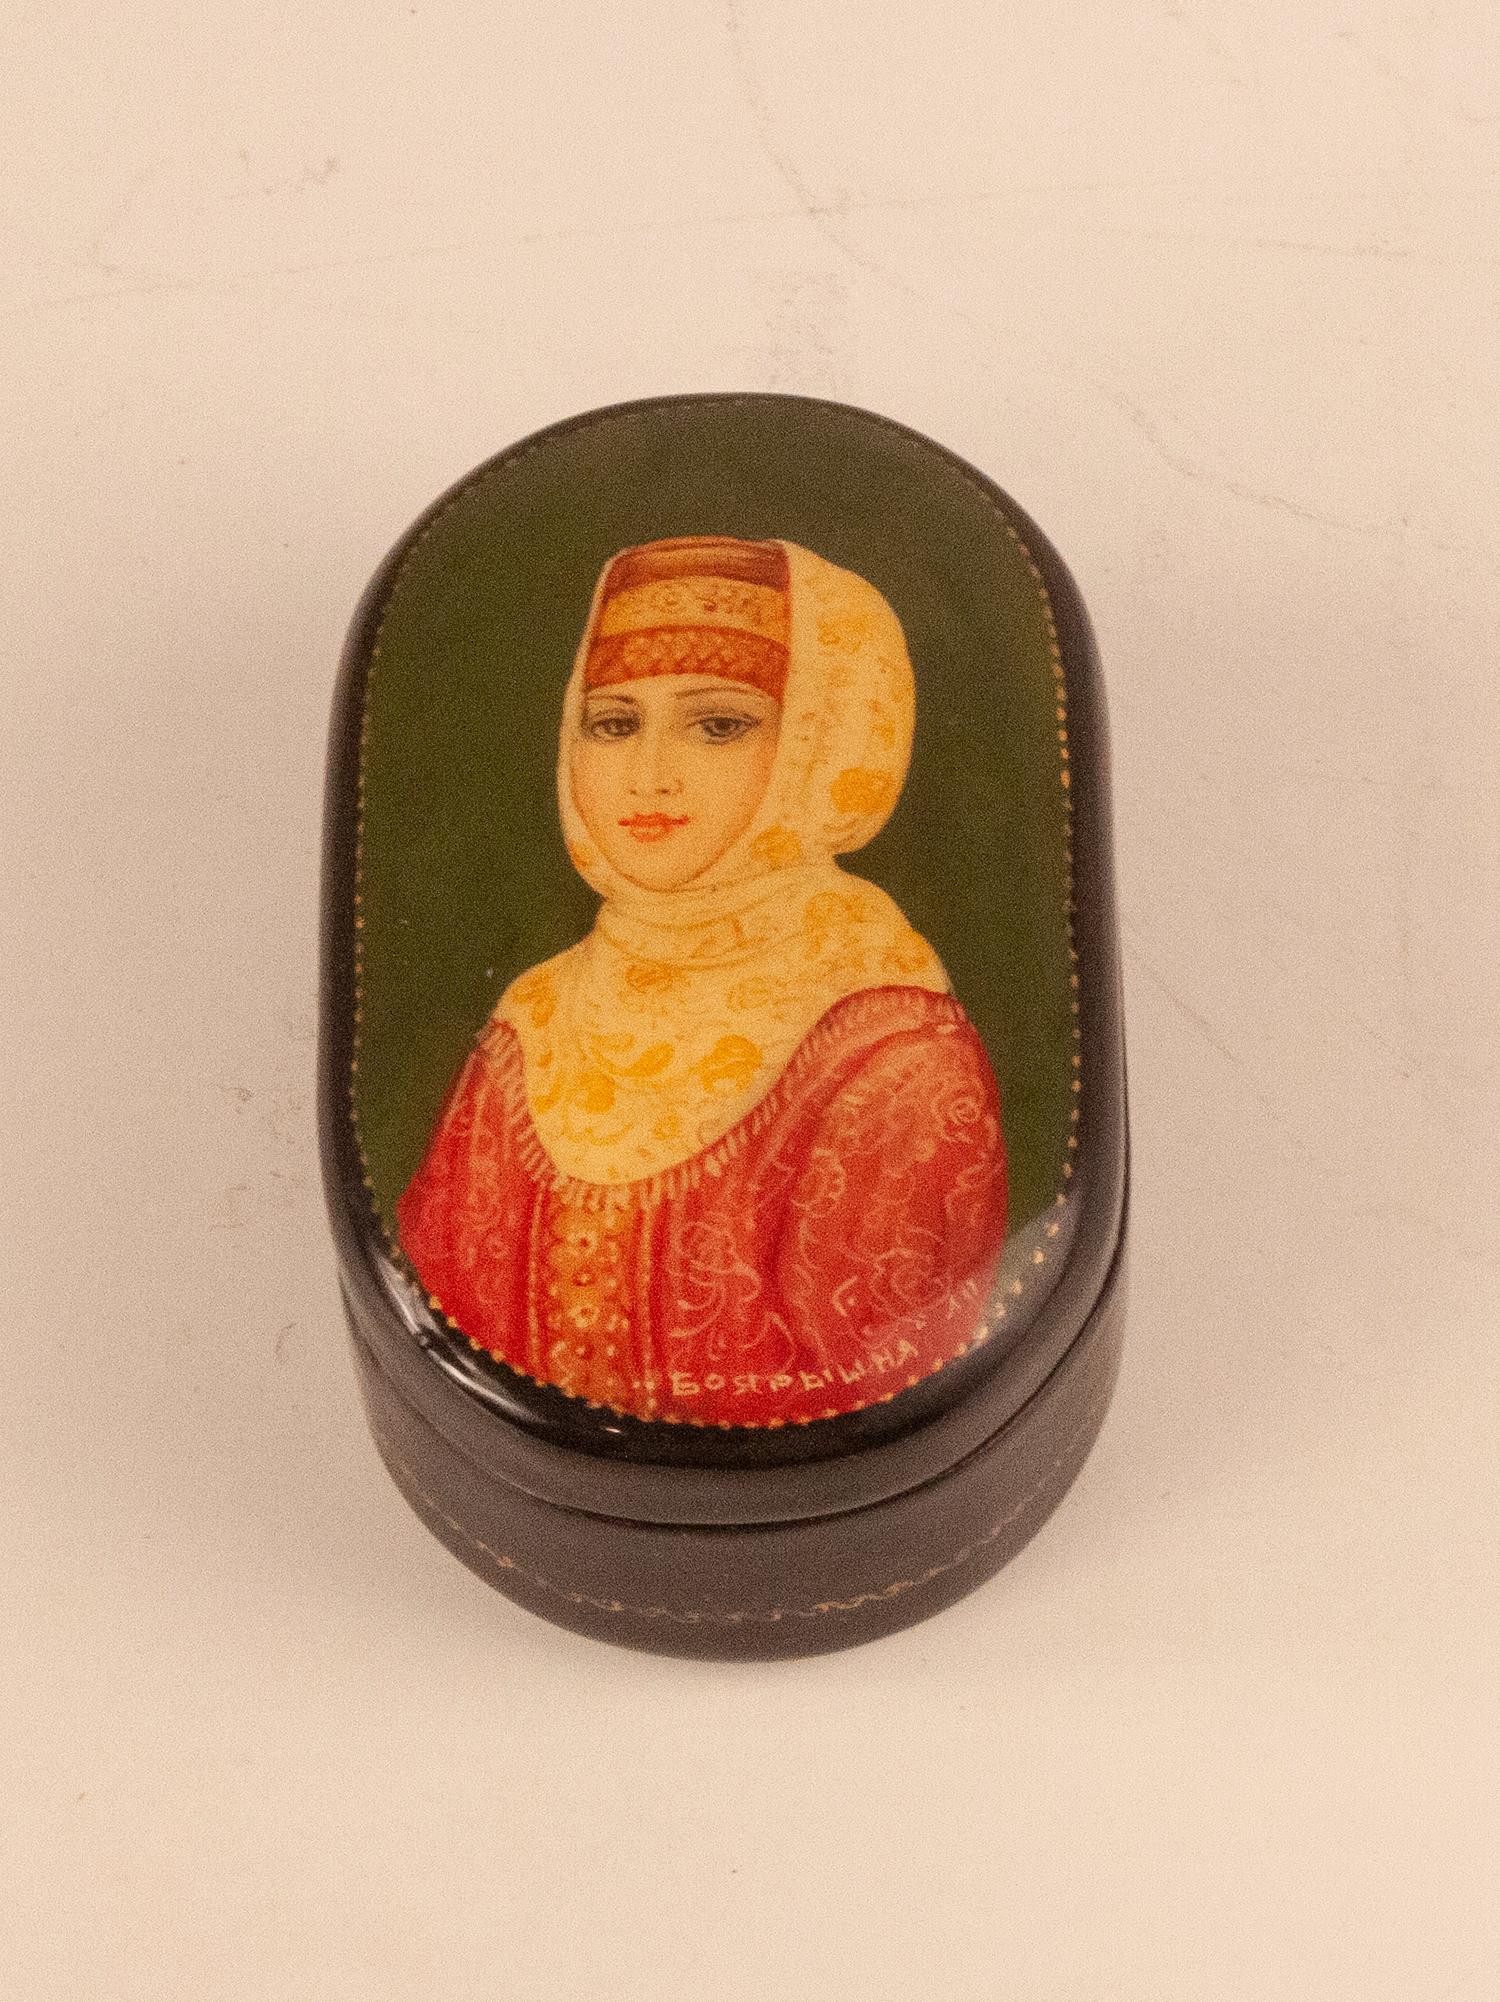 Russian hand-painted boxes are famous all over the world and have been the greatest symbol of Russian folk art for centuries. These boxes can be from four Russian schools of painting named after the Russian region where they are made: Palej,